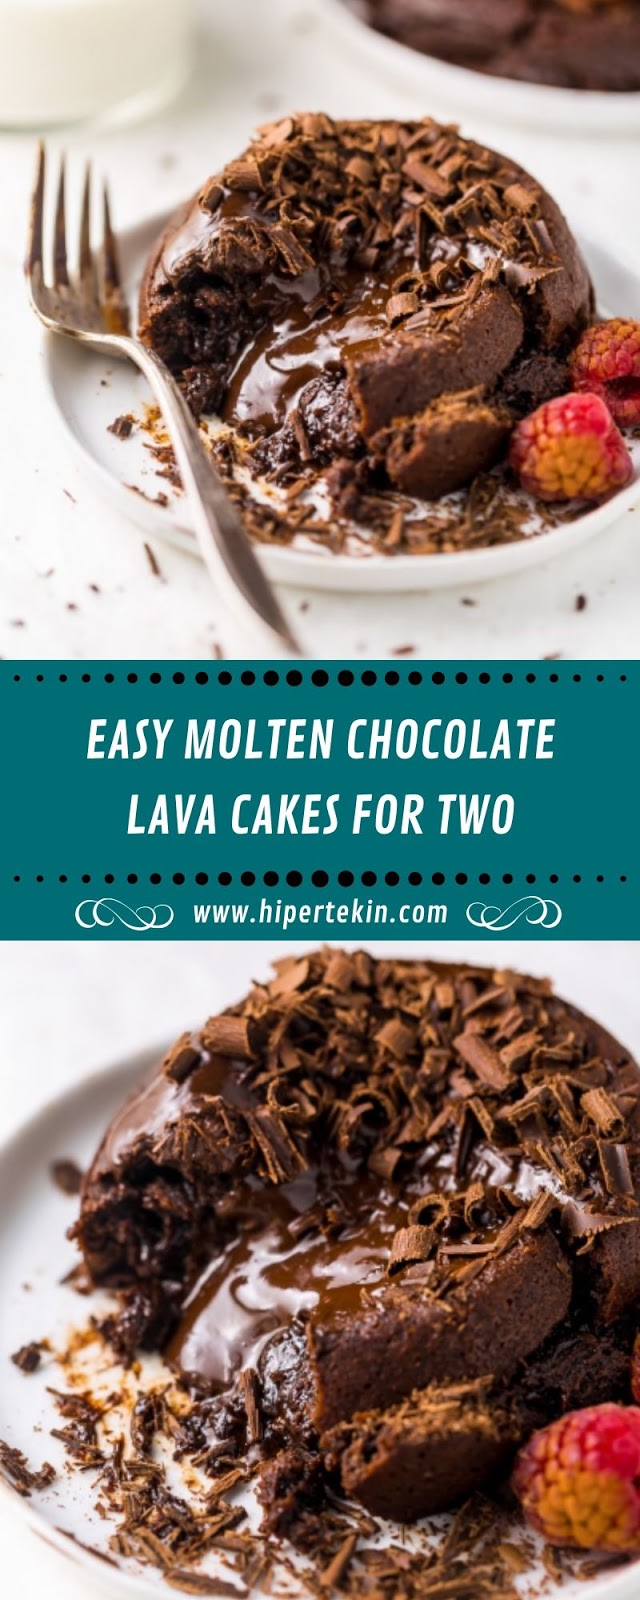 EASY MOLTEN CHOCOLATE LAVA CAKES FOR TWO